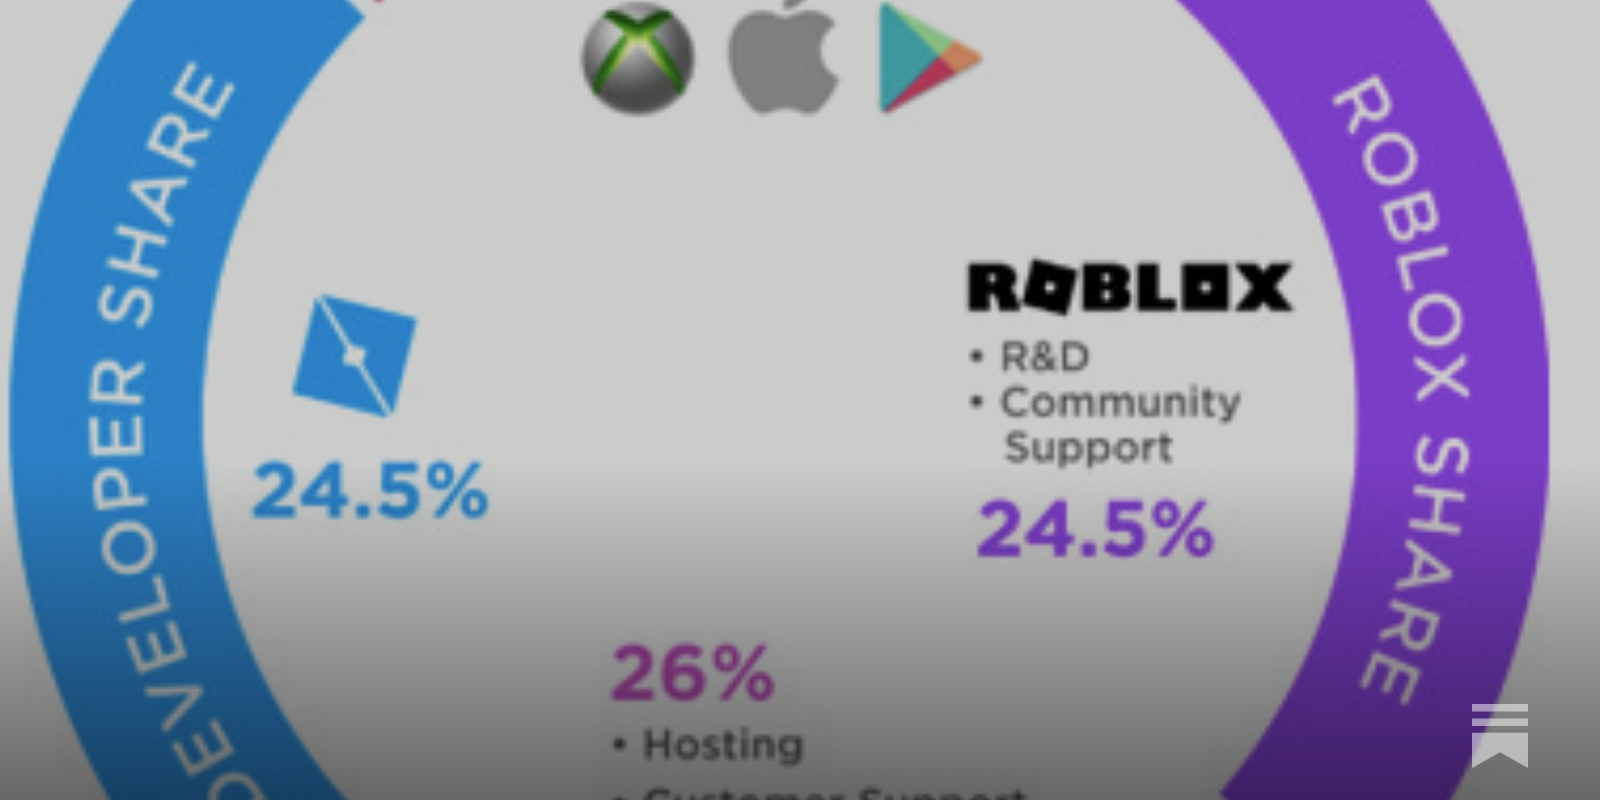 Why is Roblox Allowed on the App Store? - by Max Lowenthal